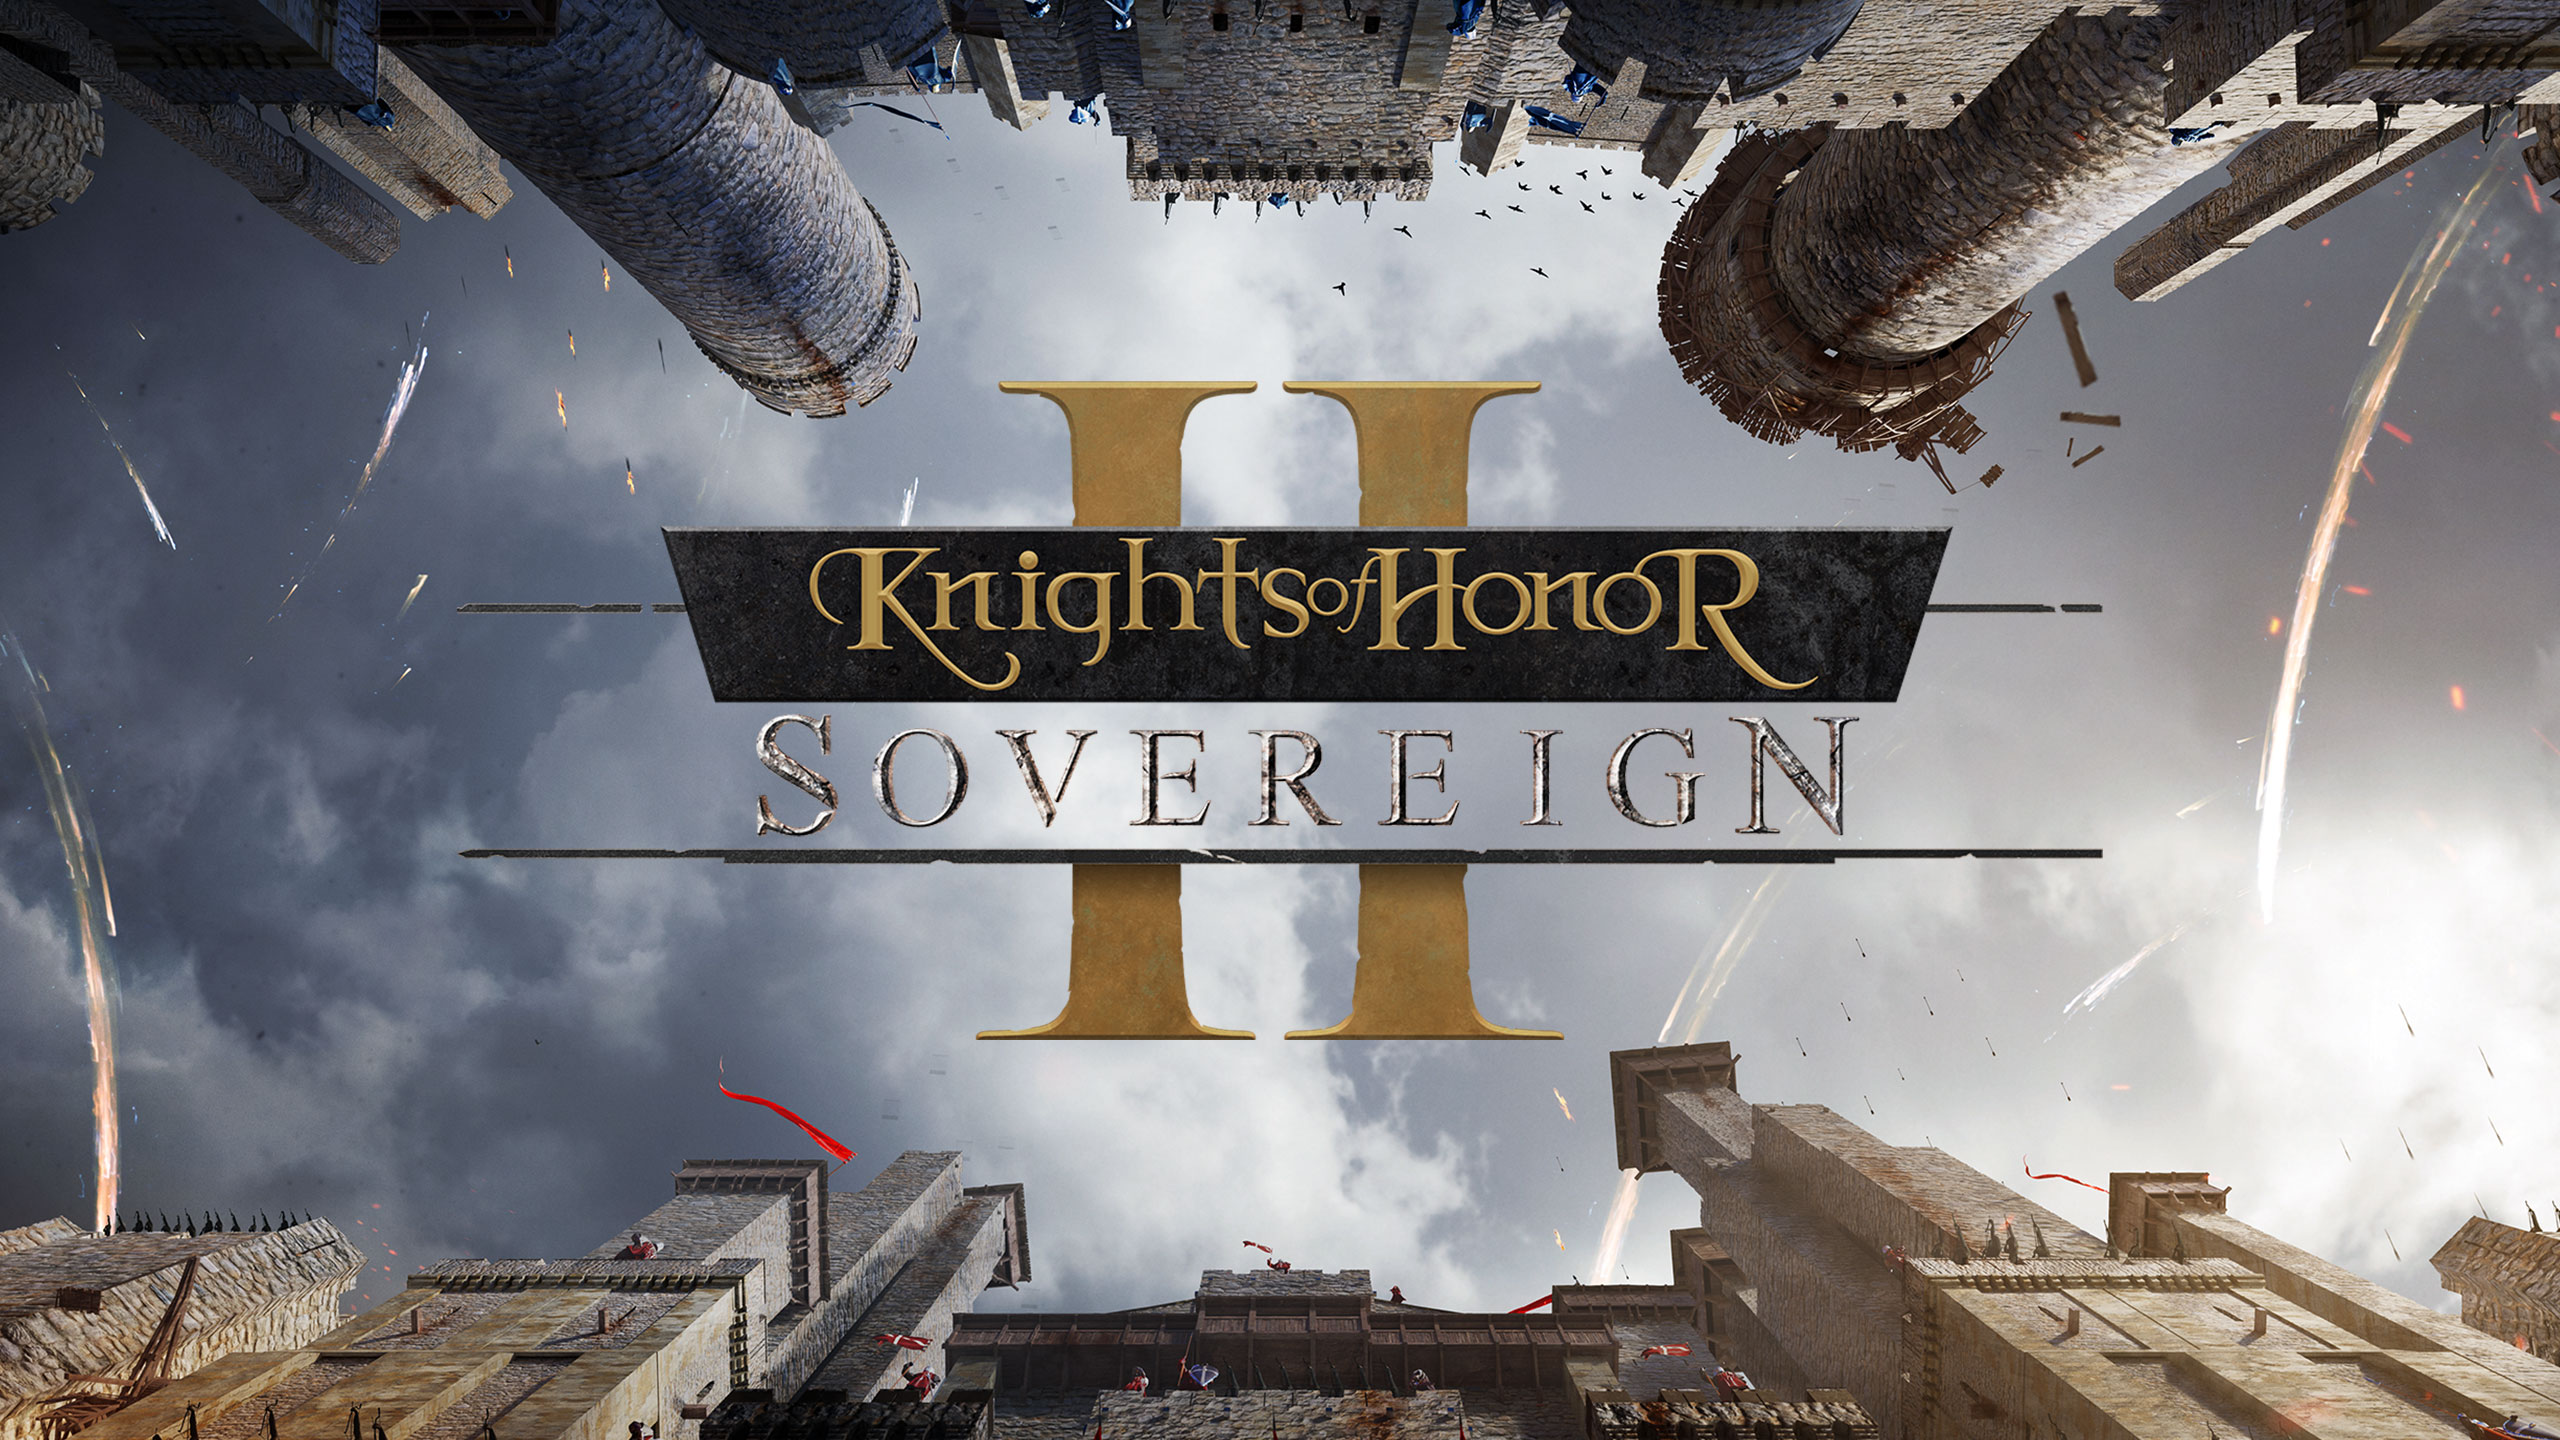 Knights of Honor II: Sovereign. Download and Buy Today Games Store